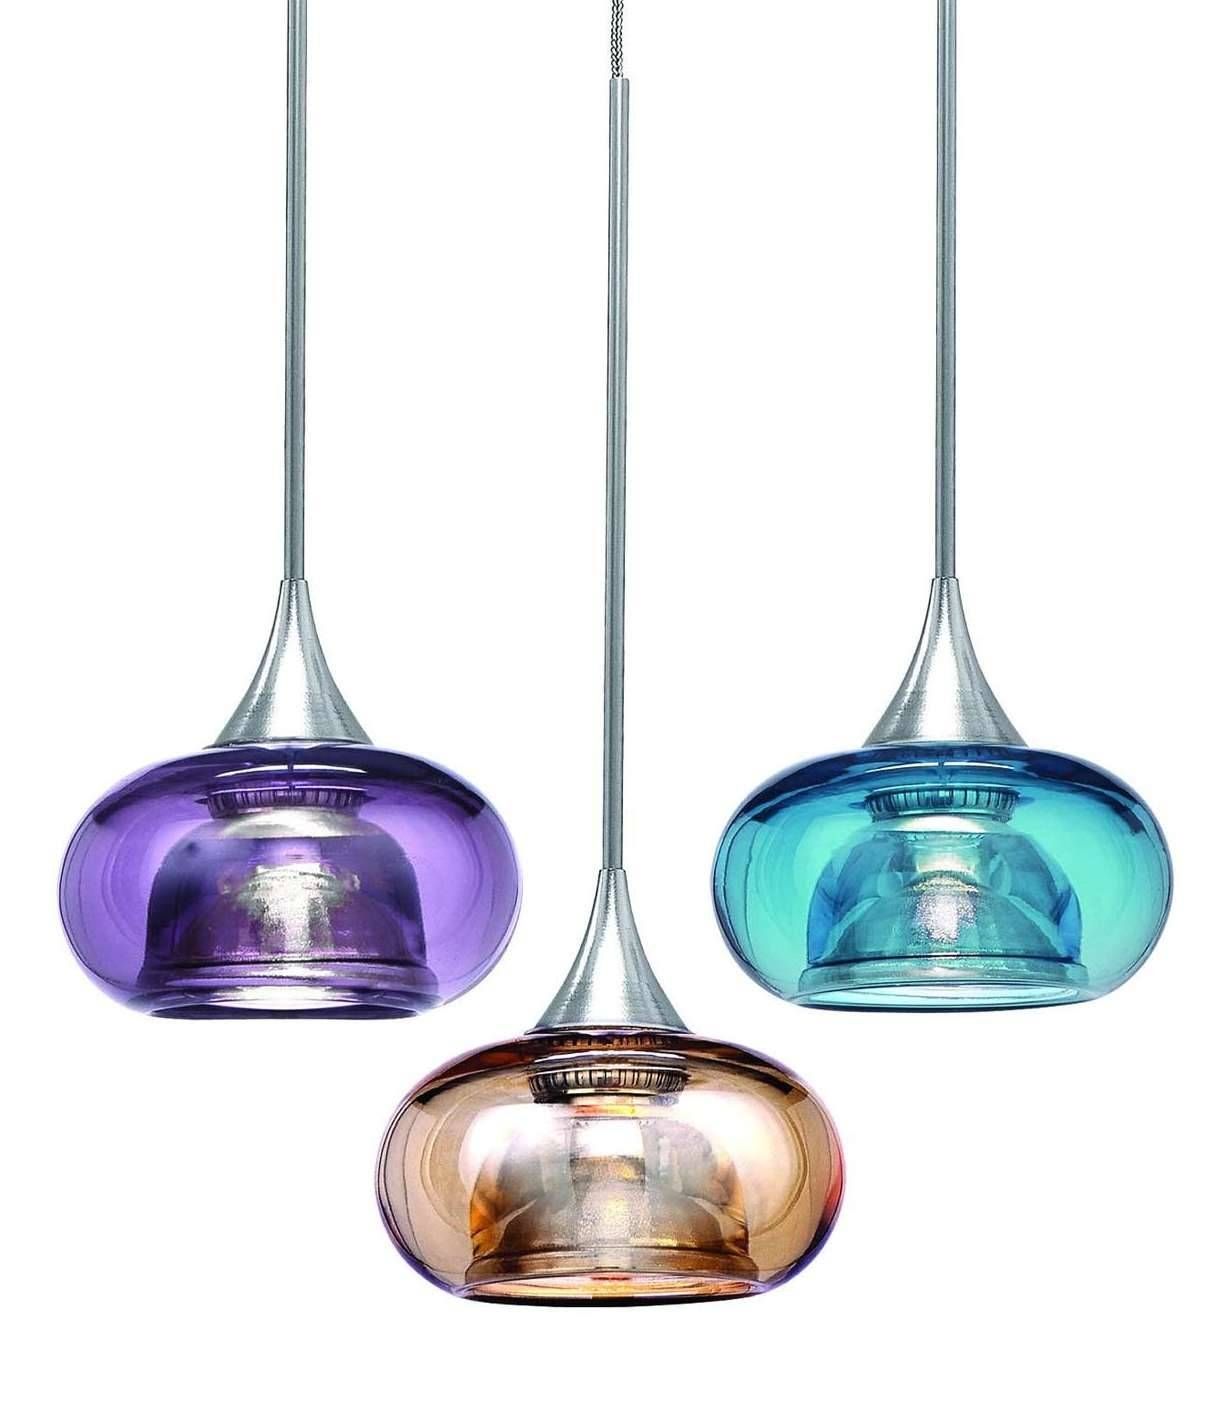 Screw In Pendant Lights Multicolor | Advice For Your Home Decoration With Regard To Multi Coloured Pendant Lights (View 11 of 15)